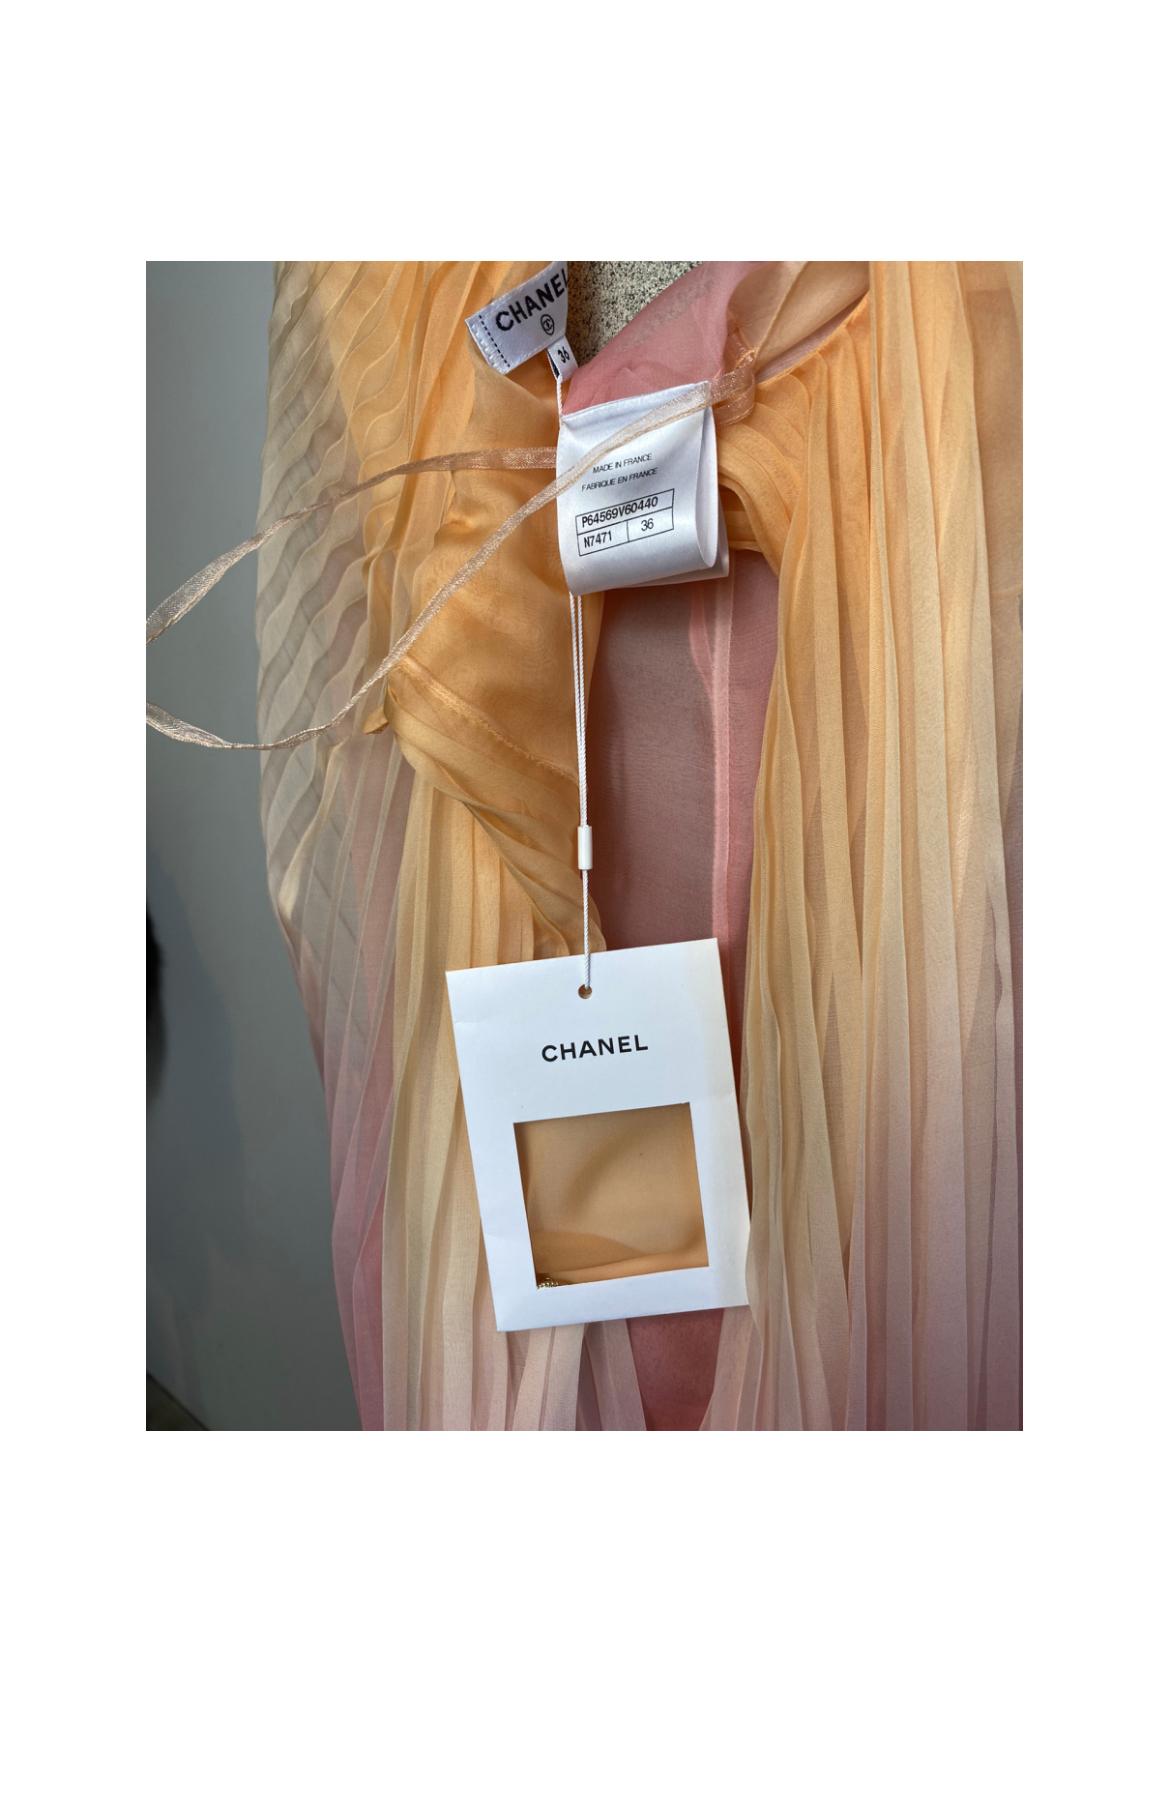 Long Chanel dress, pre-Fall 2020 collection, size 36 French, therefore 40Italian, length 122cm, waist about 40cm entirely pleated, with closure on the shoulder with gold-colored buttons, shaded color starting from the top with a peach color, going